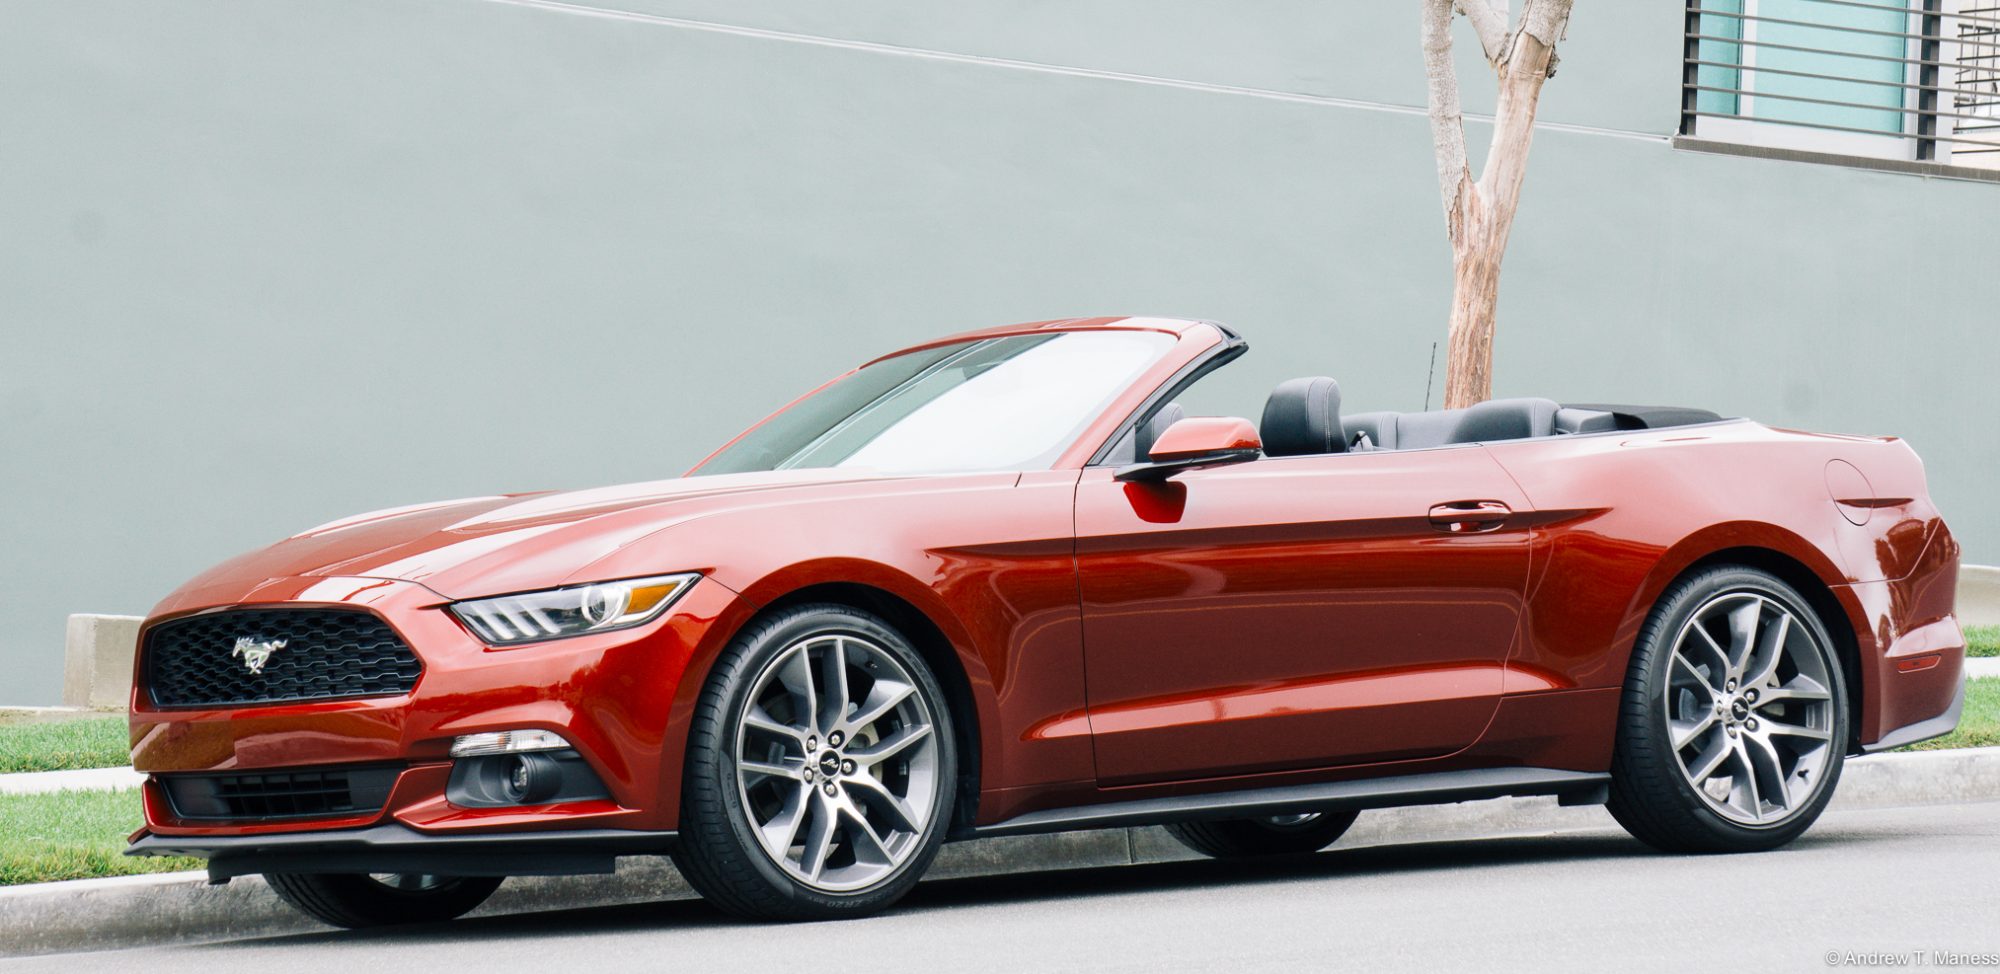 How To Get A Deal On A Ford Mustang Convertible - The AutoTempest Blog